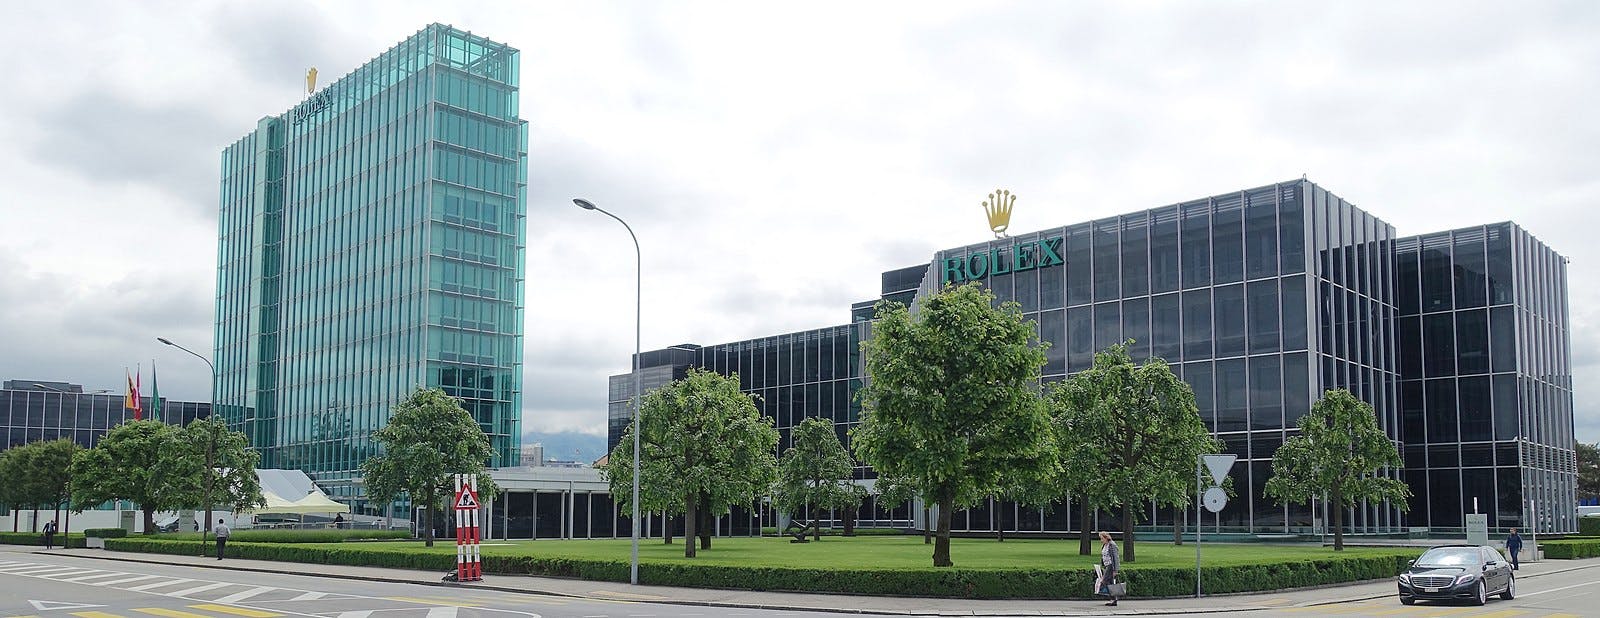 Rolex Factory in Geneva, featuring two office buildings one light green and one dark black with rolex logo on top and trees and grass in the foreground with grey sky above